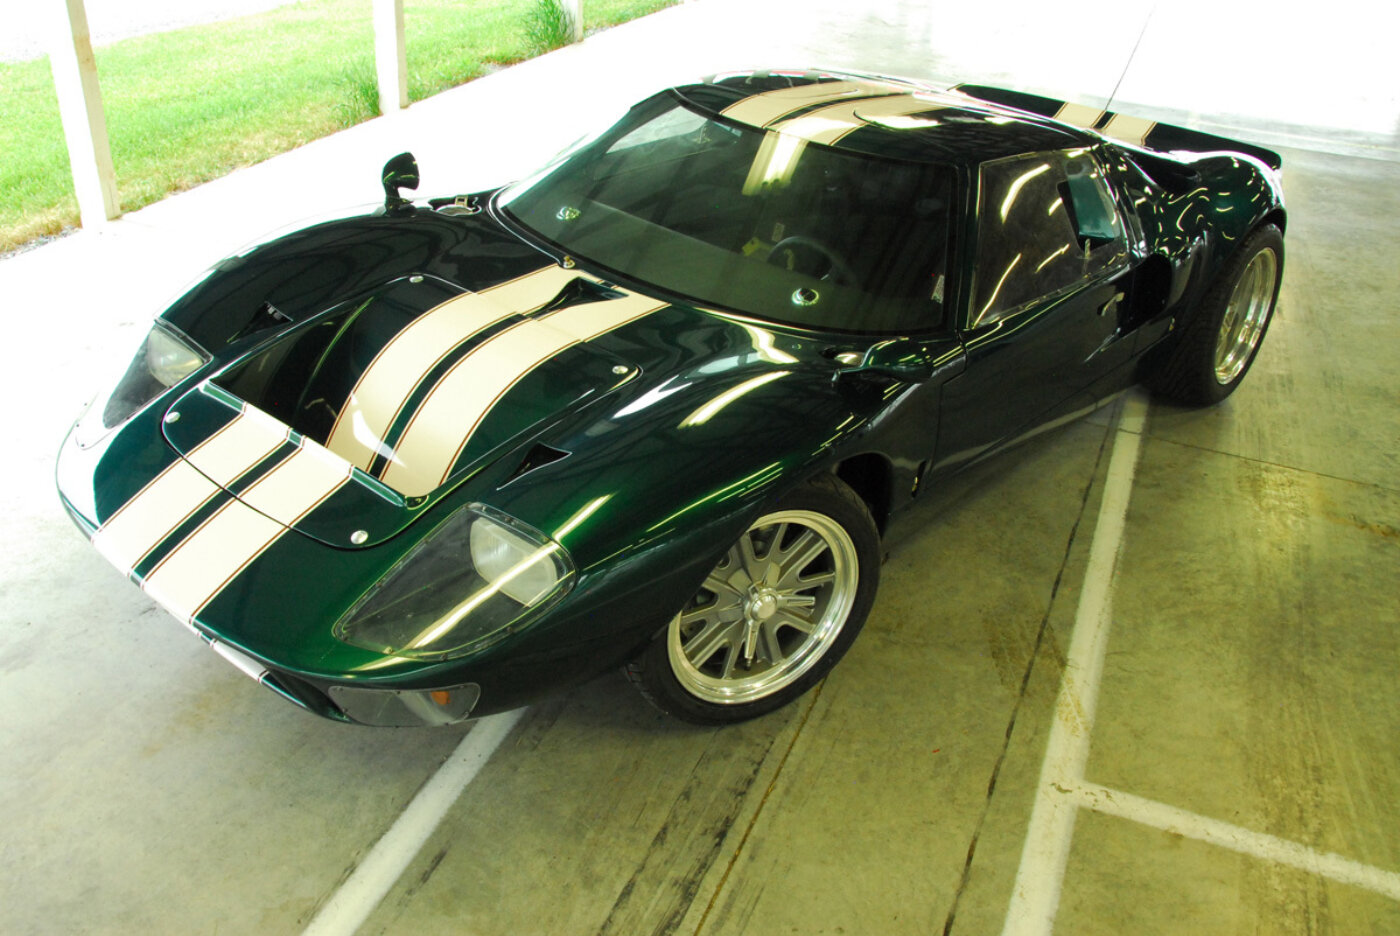 						Active Power Ford Gt40 10
			